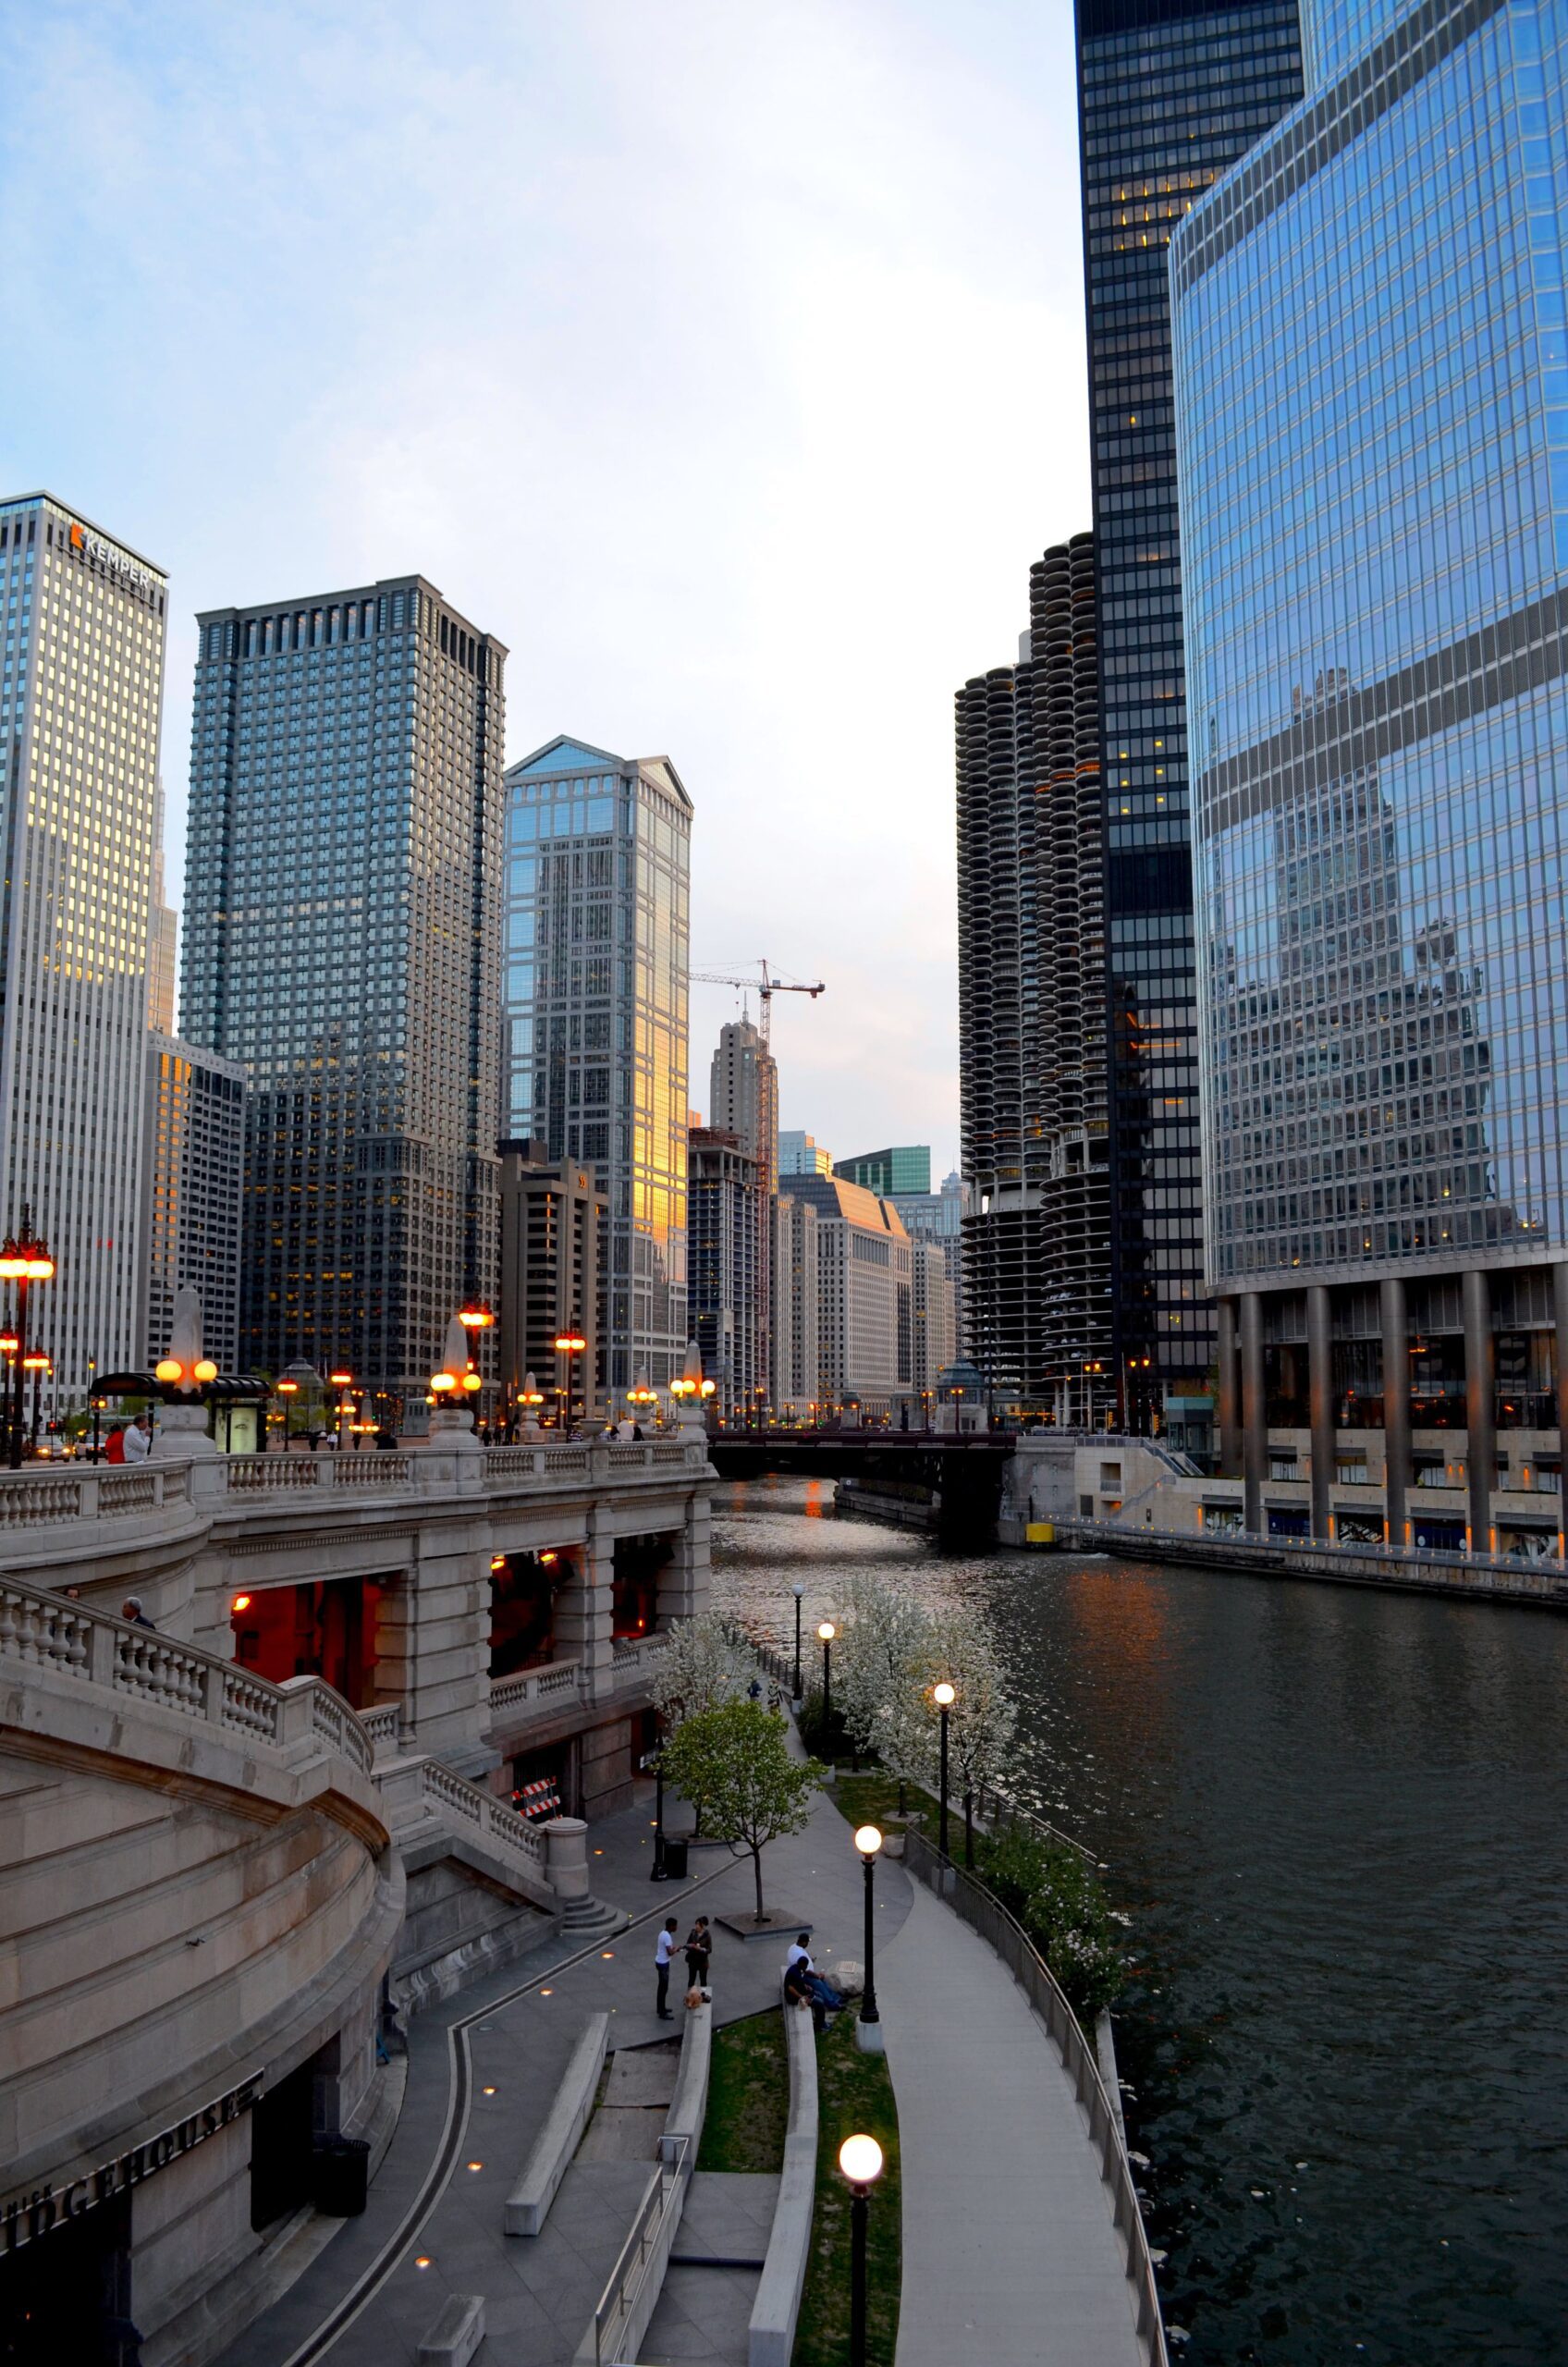 Image of Chicago River flanked by tall buildings on either side in Chicago, Illinois.